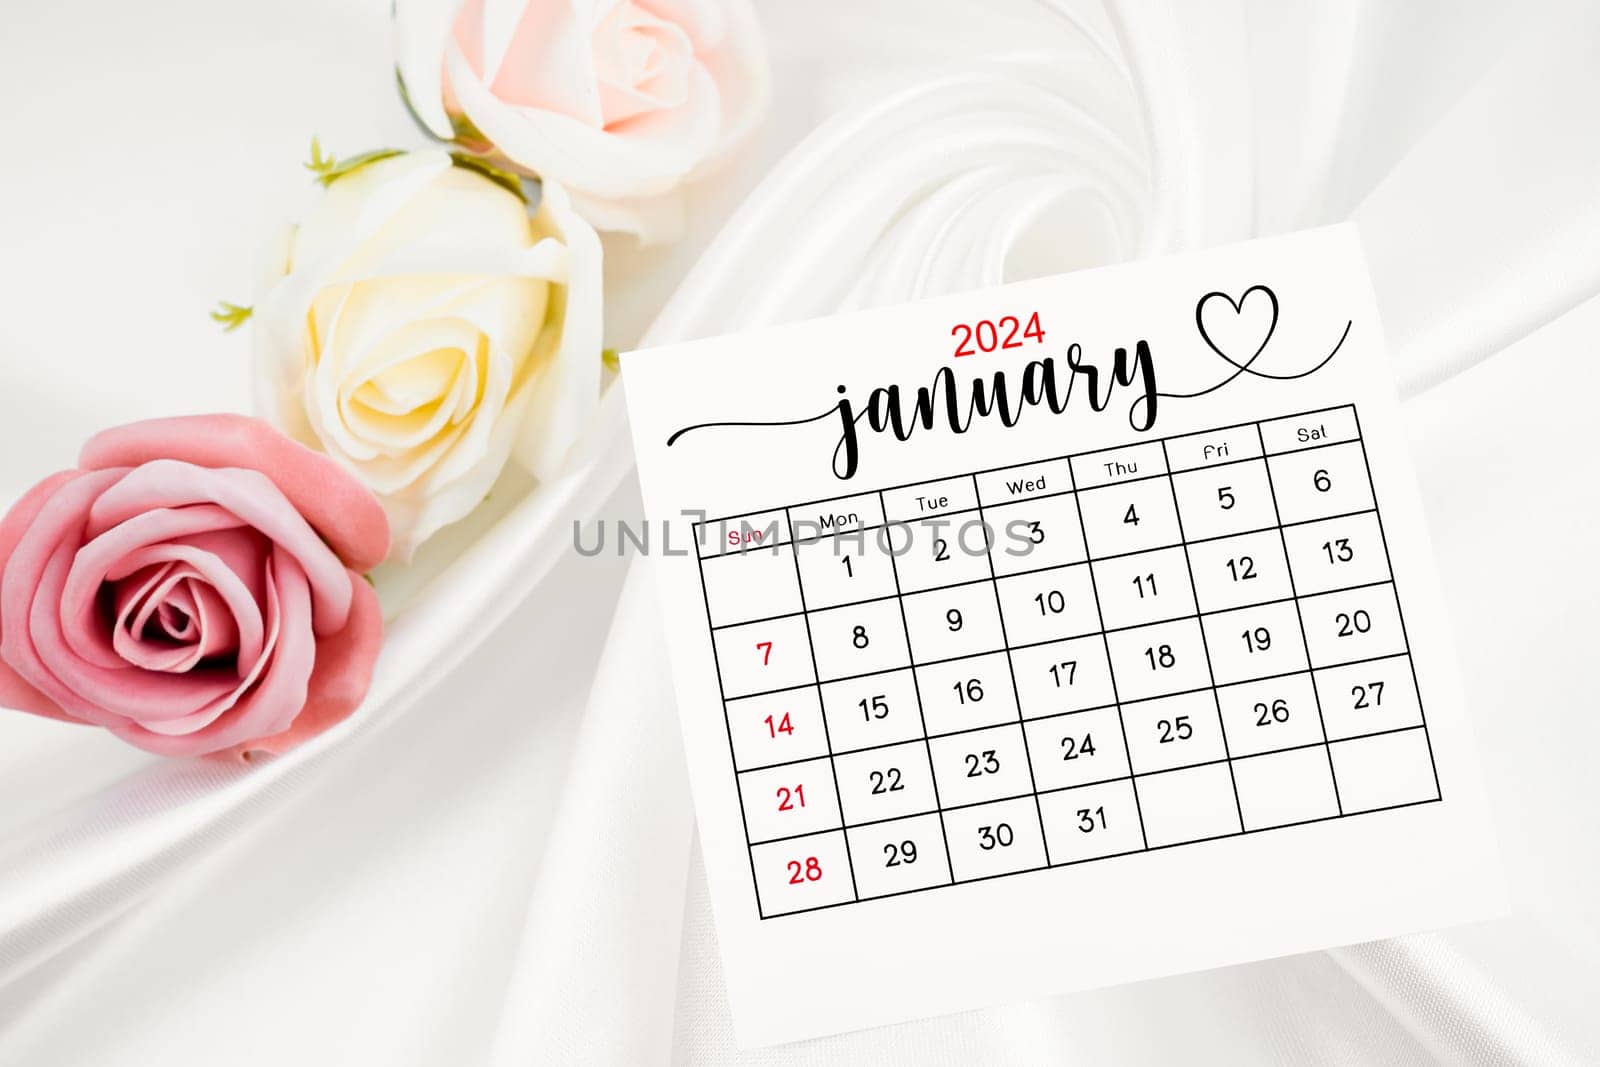 January 2024 calendar page and rose flower on white satin textile. by Gamjai